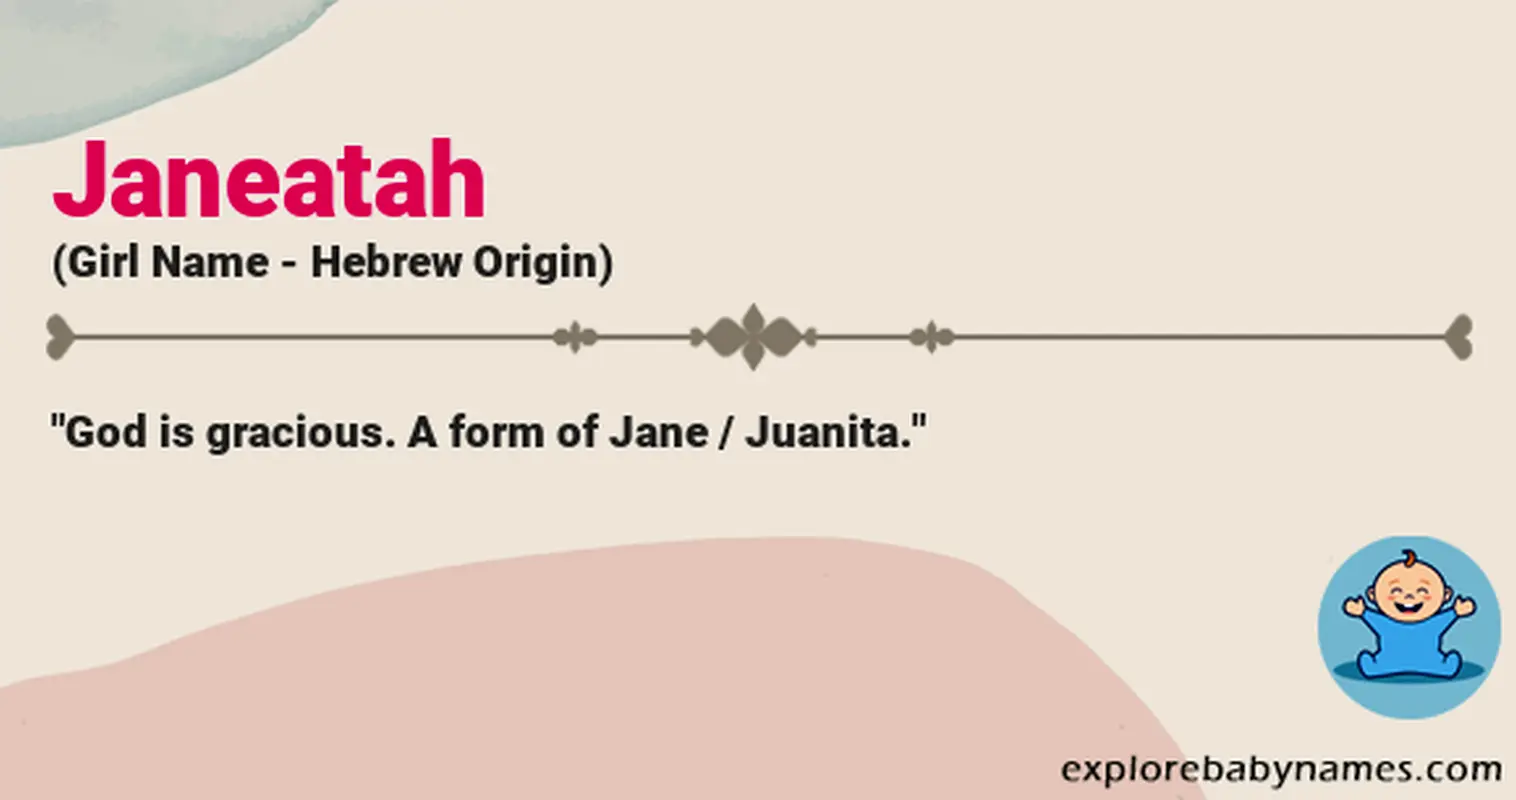 Meaning of Janeatah